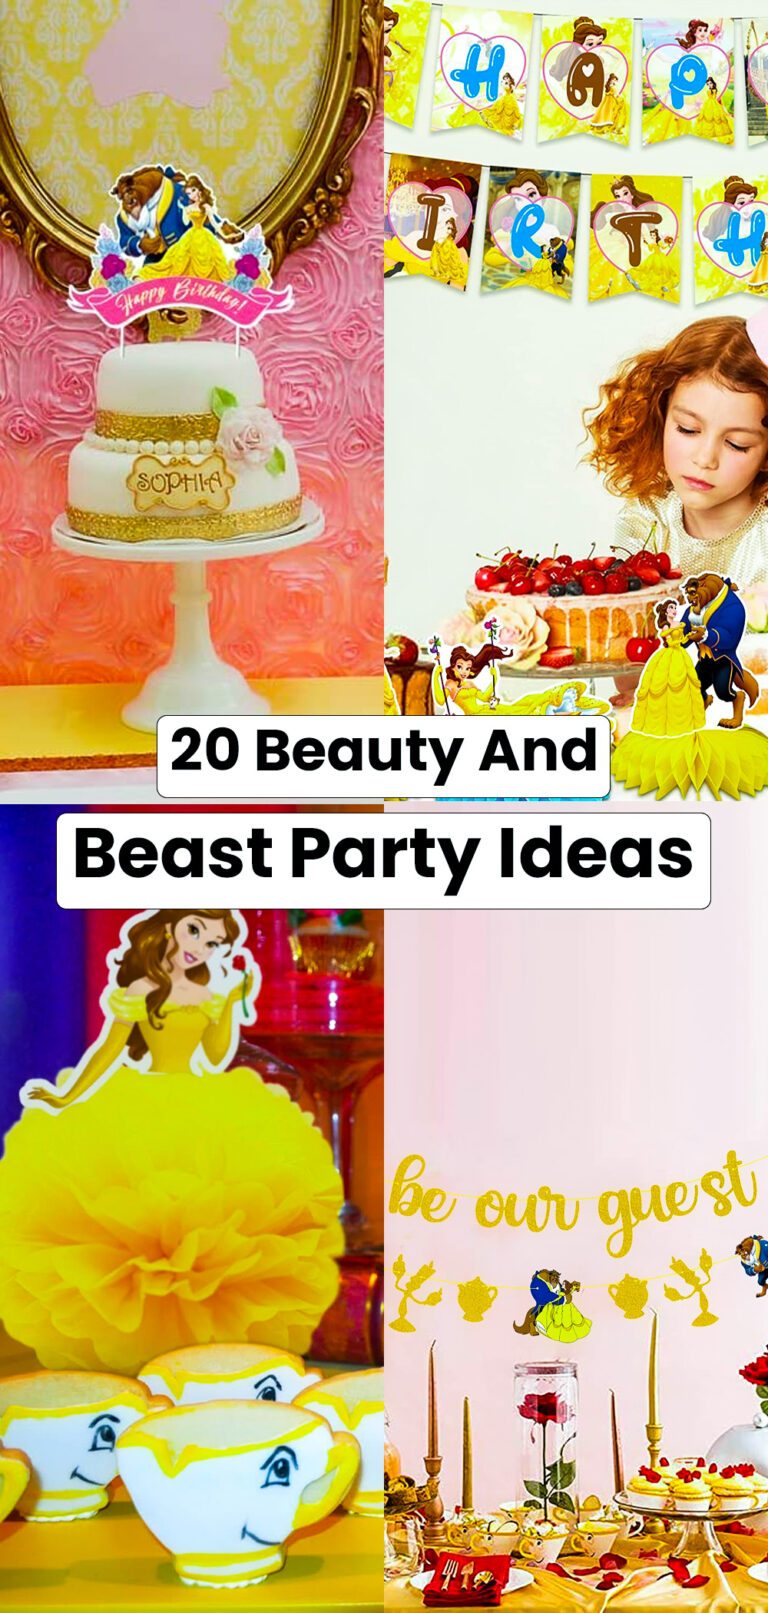 20 Beauty and Beast Party Ideas